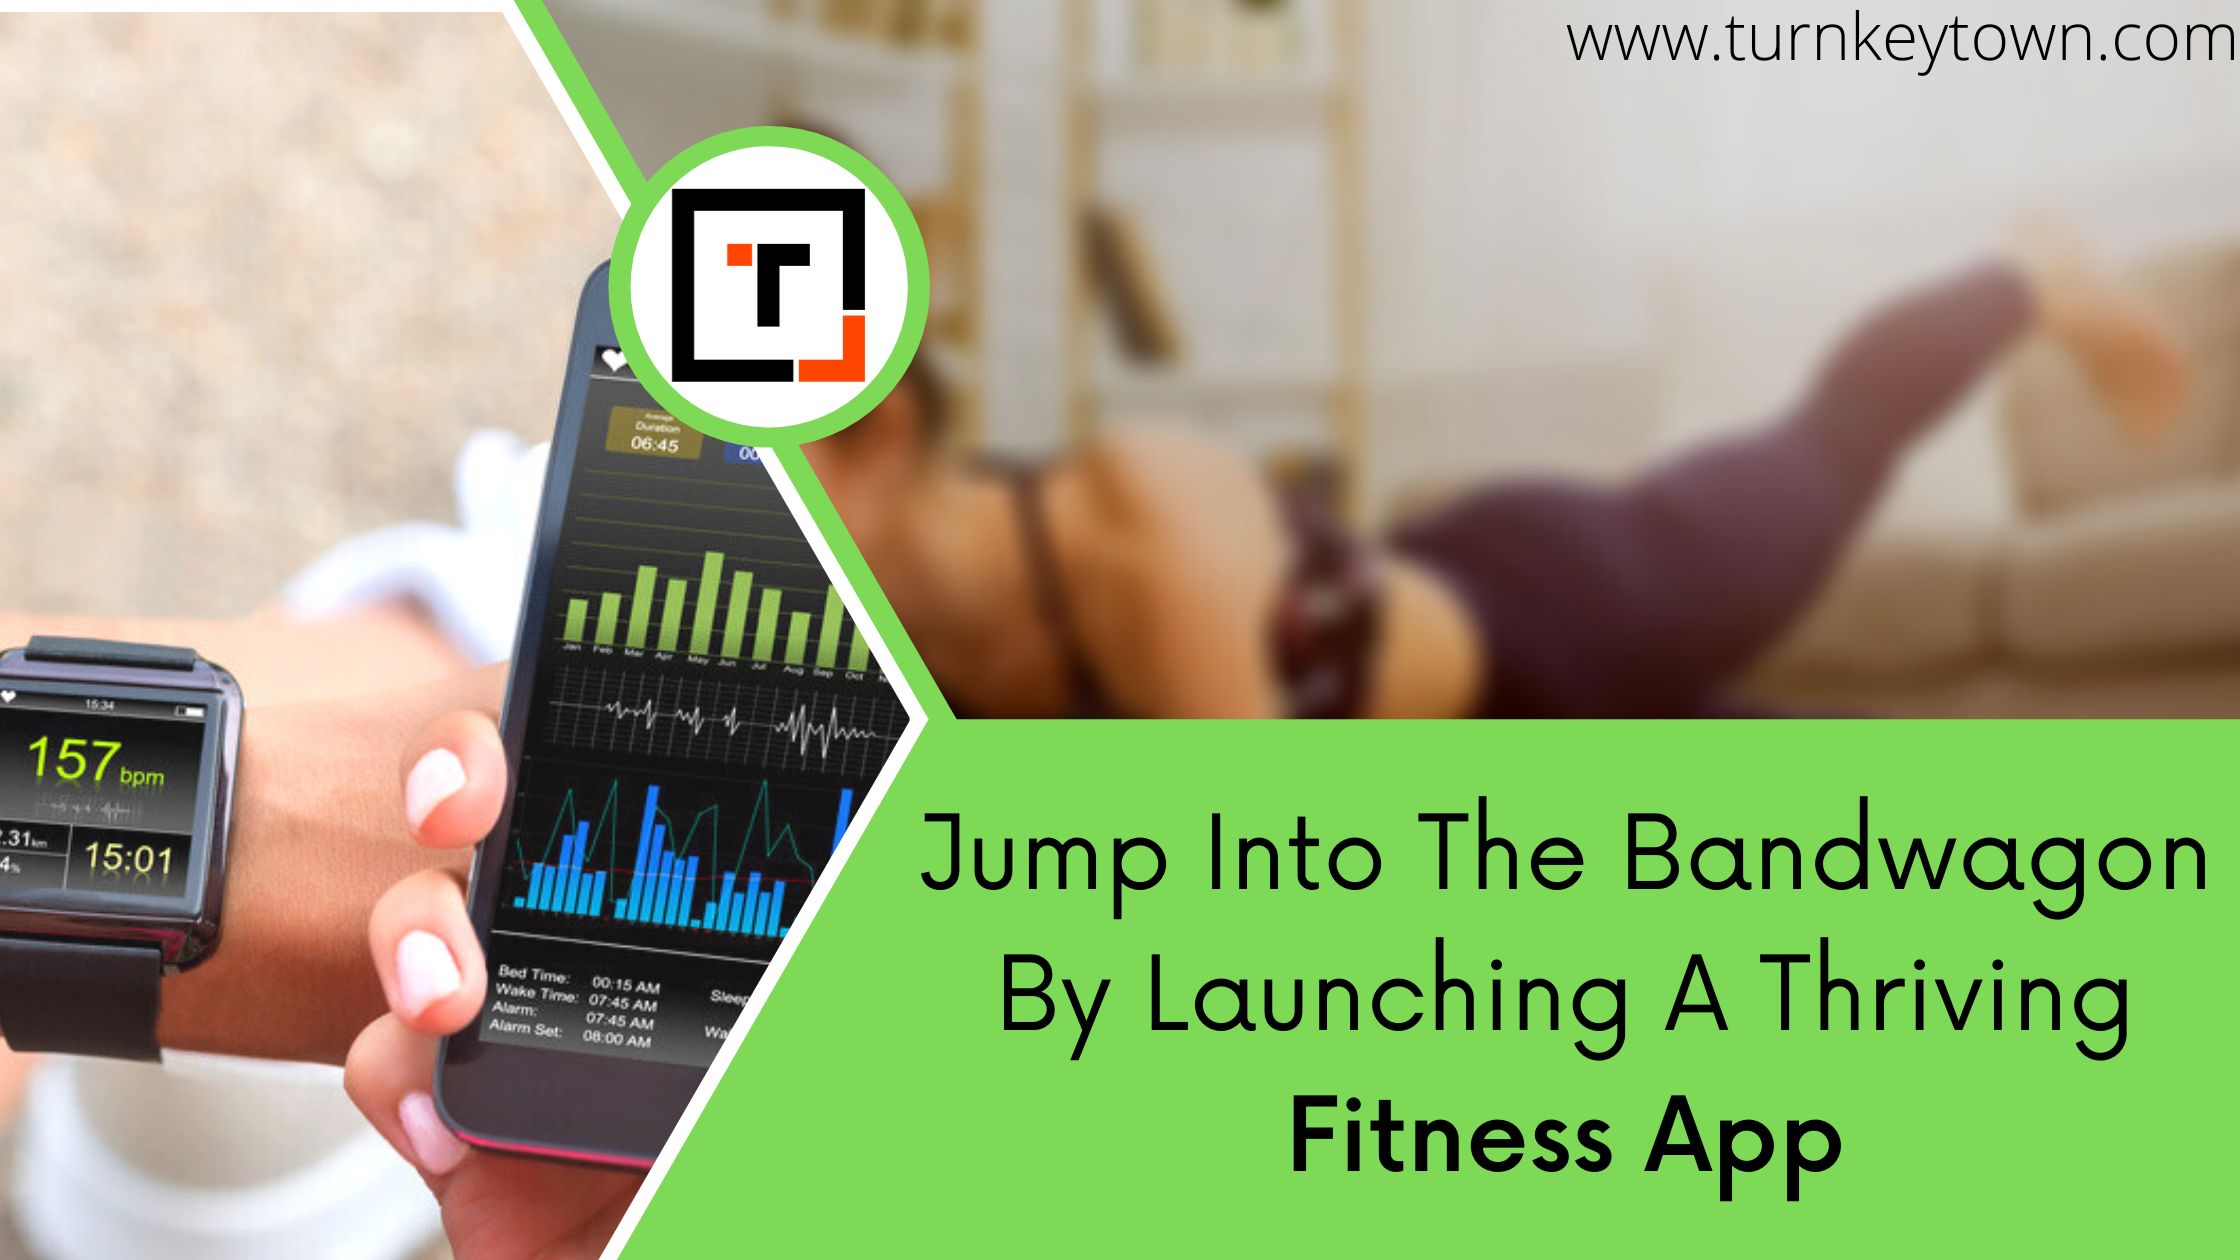 Healthifyme Clone: Jump Into The Bandwagon By Launching A Thriving Fitness App